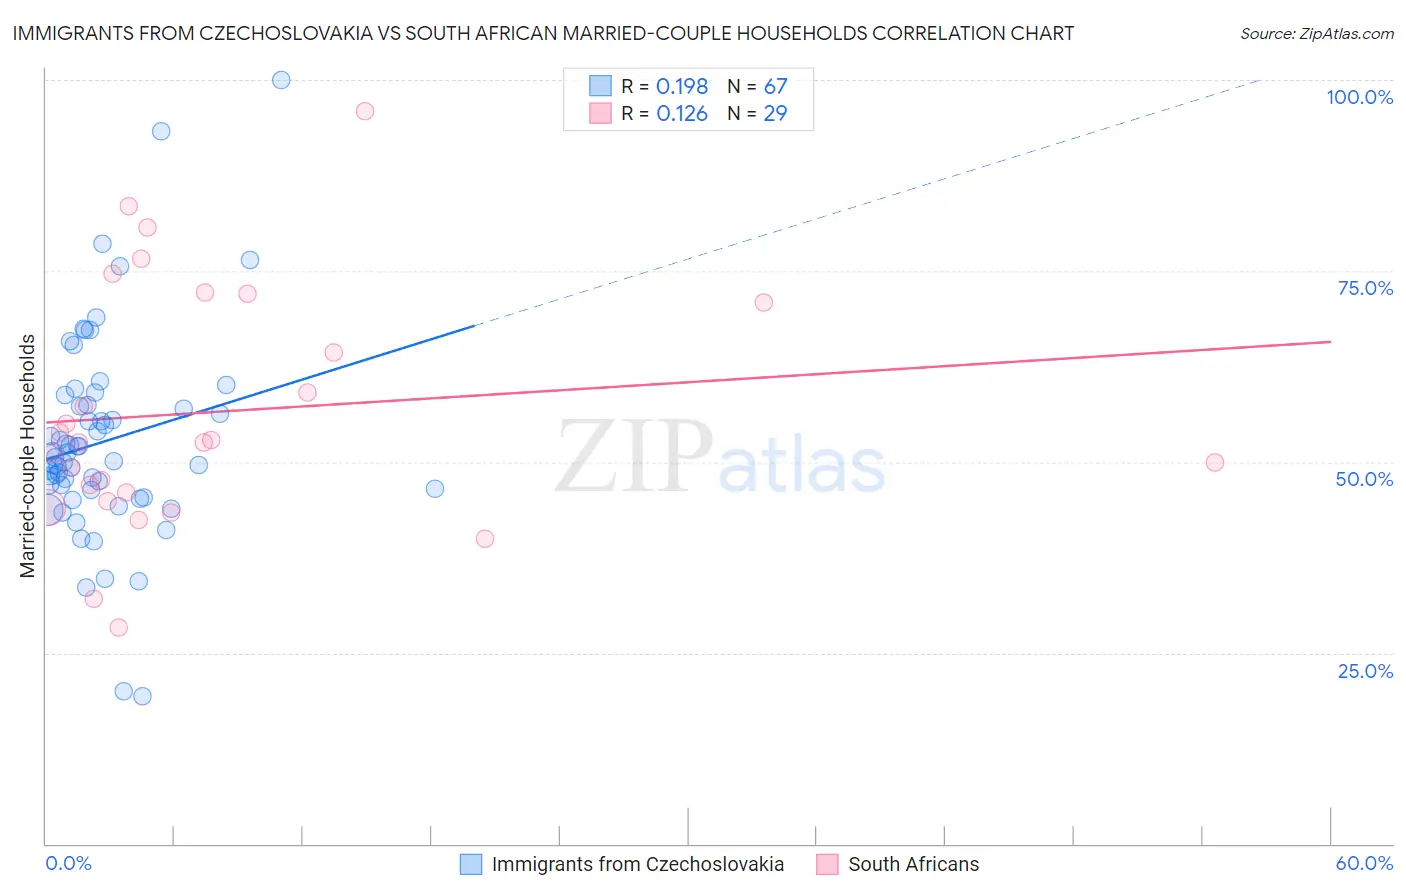 Immigrants from Czechoslovakia vs South African Married-couple Households